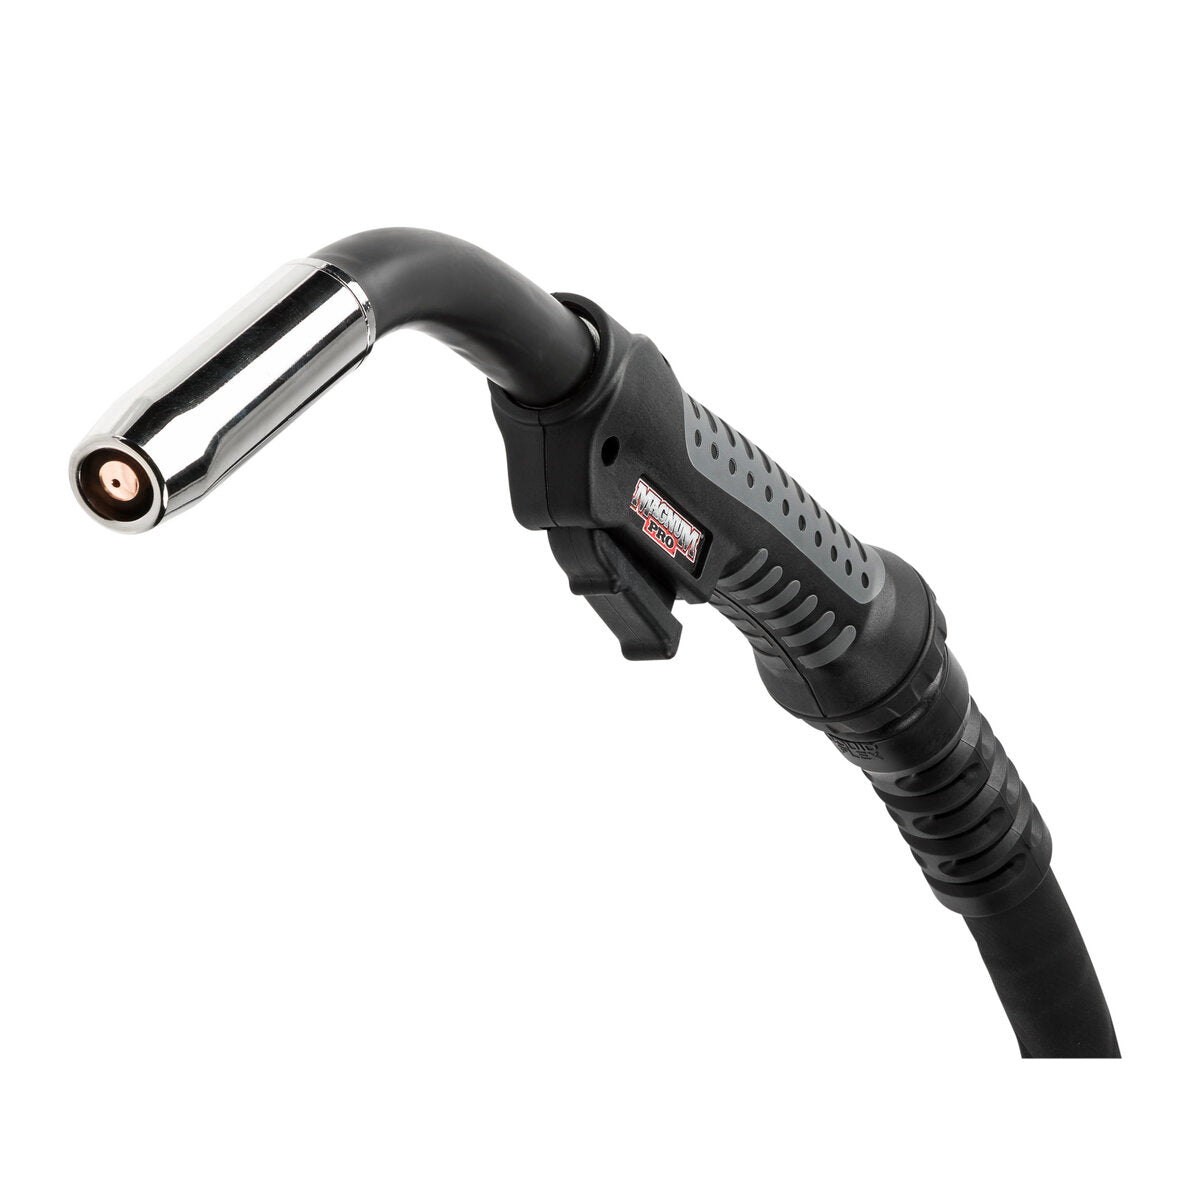 Lincoln Electric - Magnum® PRO 500 Water Cooled Welding Guns - Ext. Length Gun Tube - K4885-2-10-332